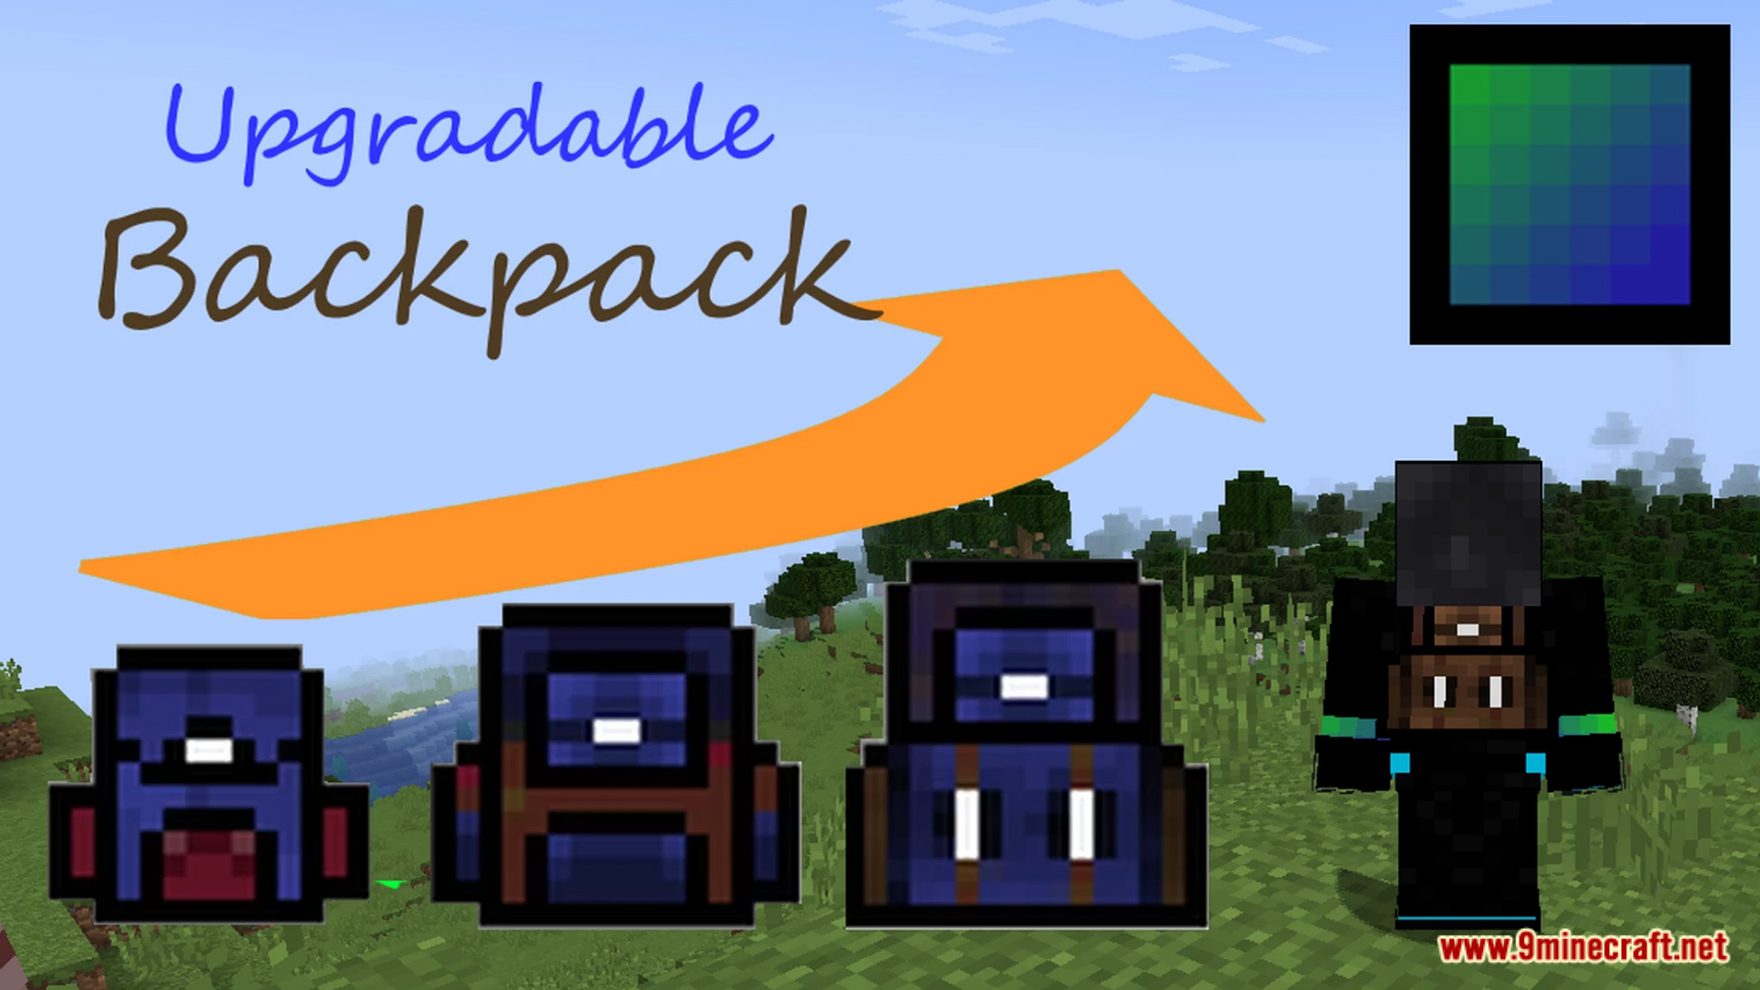 Upgradable Backpack Data Pack (1.20.6, 1.20.1) - Carry World On Shoulders 8